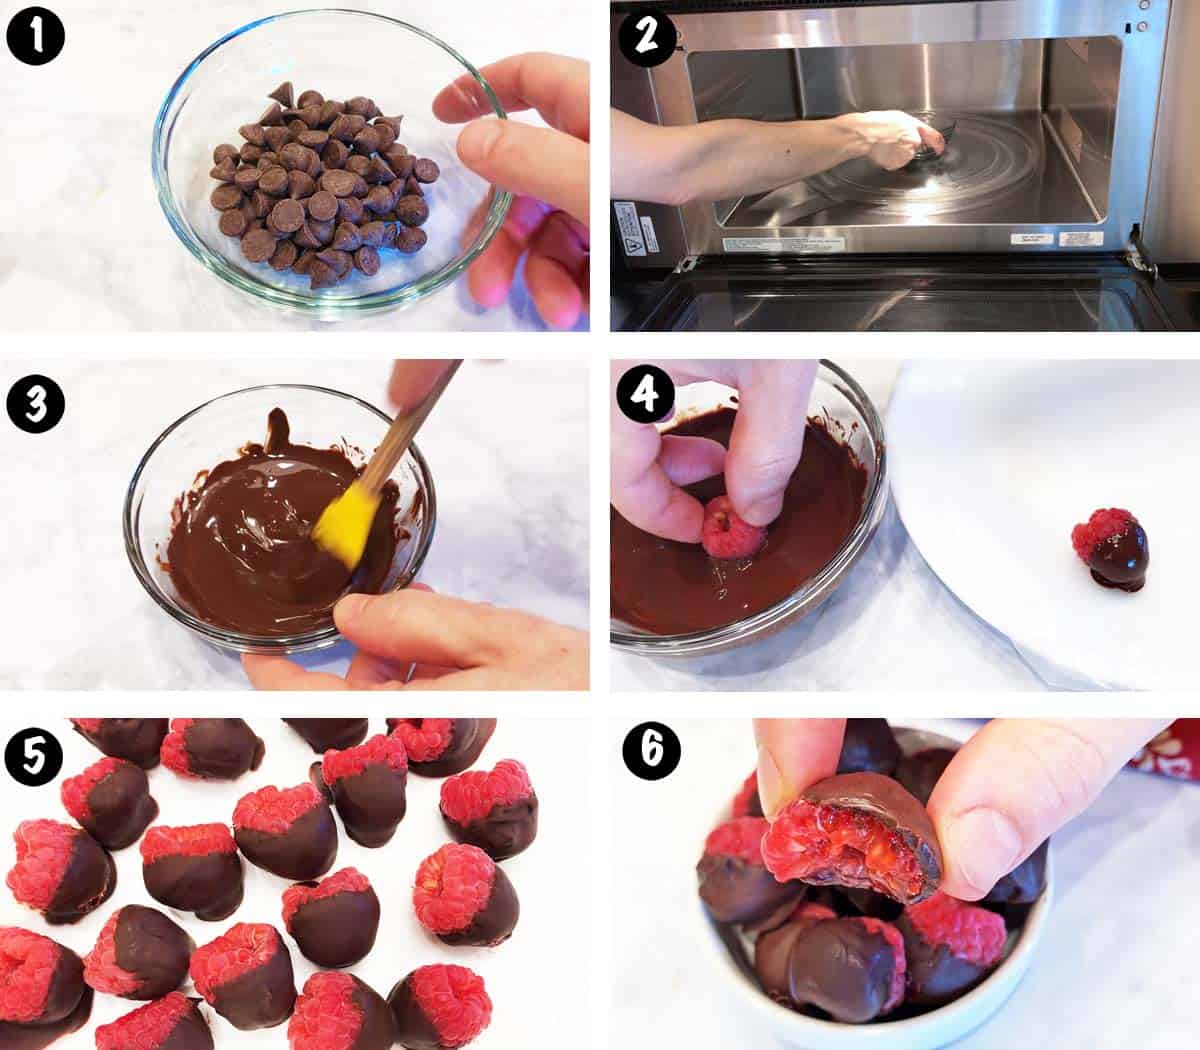 A six-photo collage showing the steps for making chocolate-covered raspberries. 